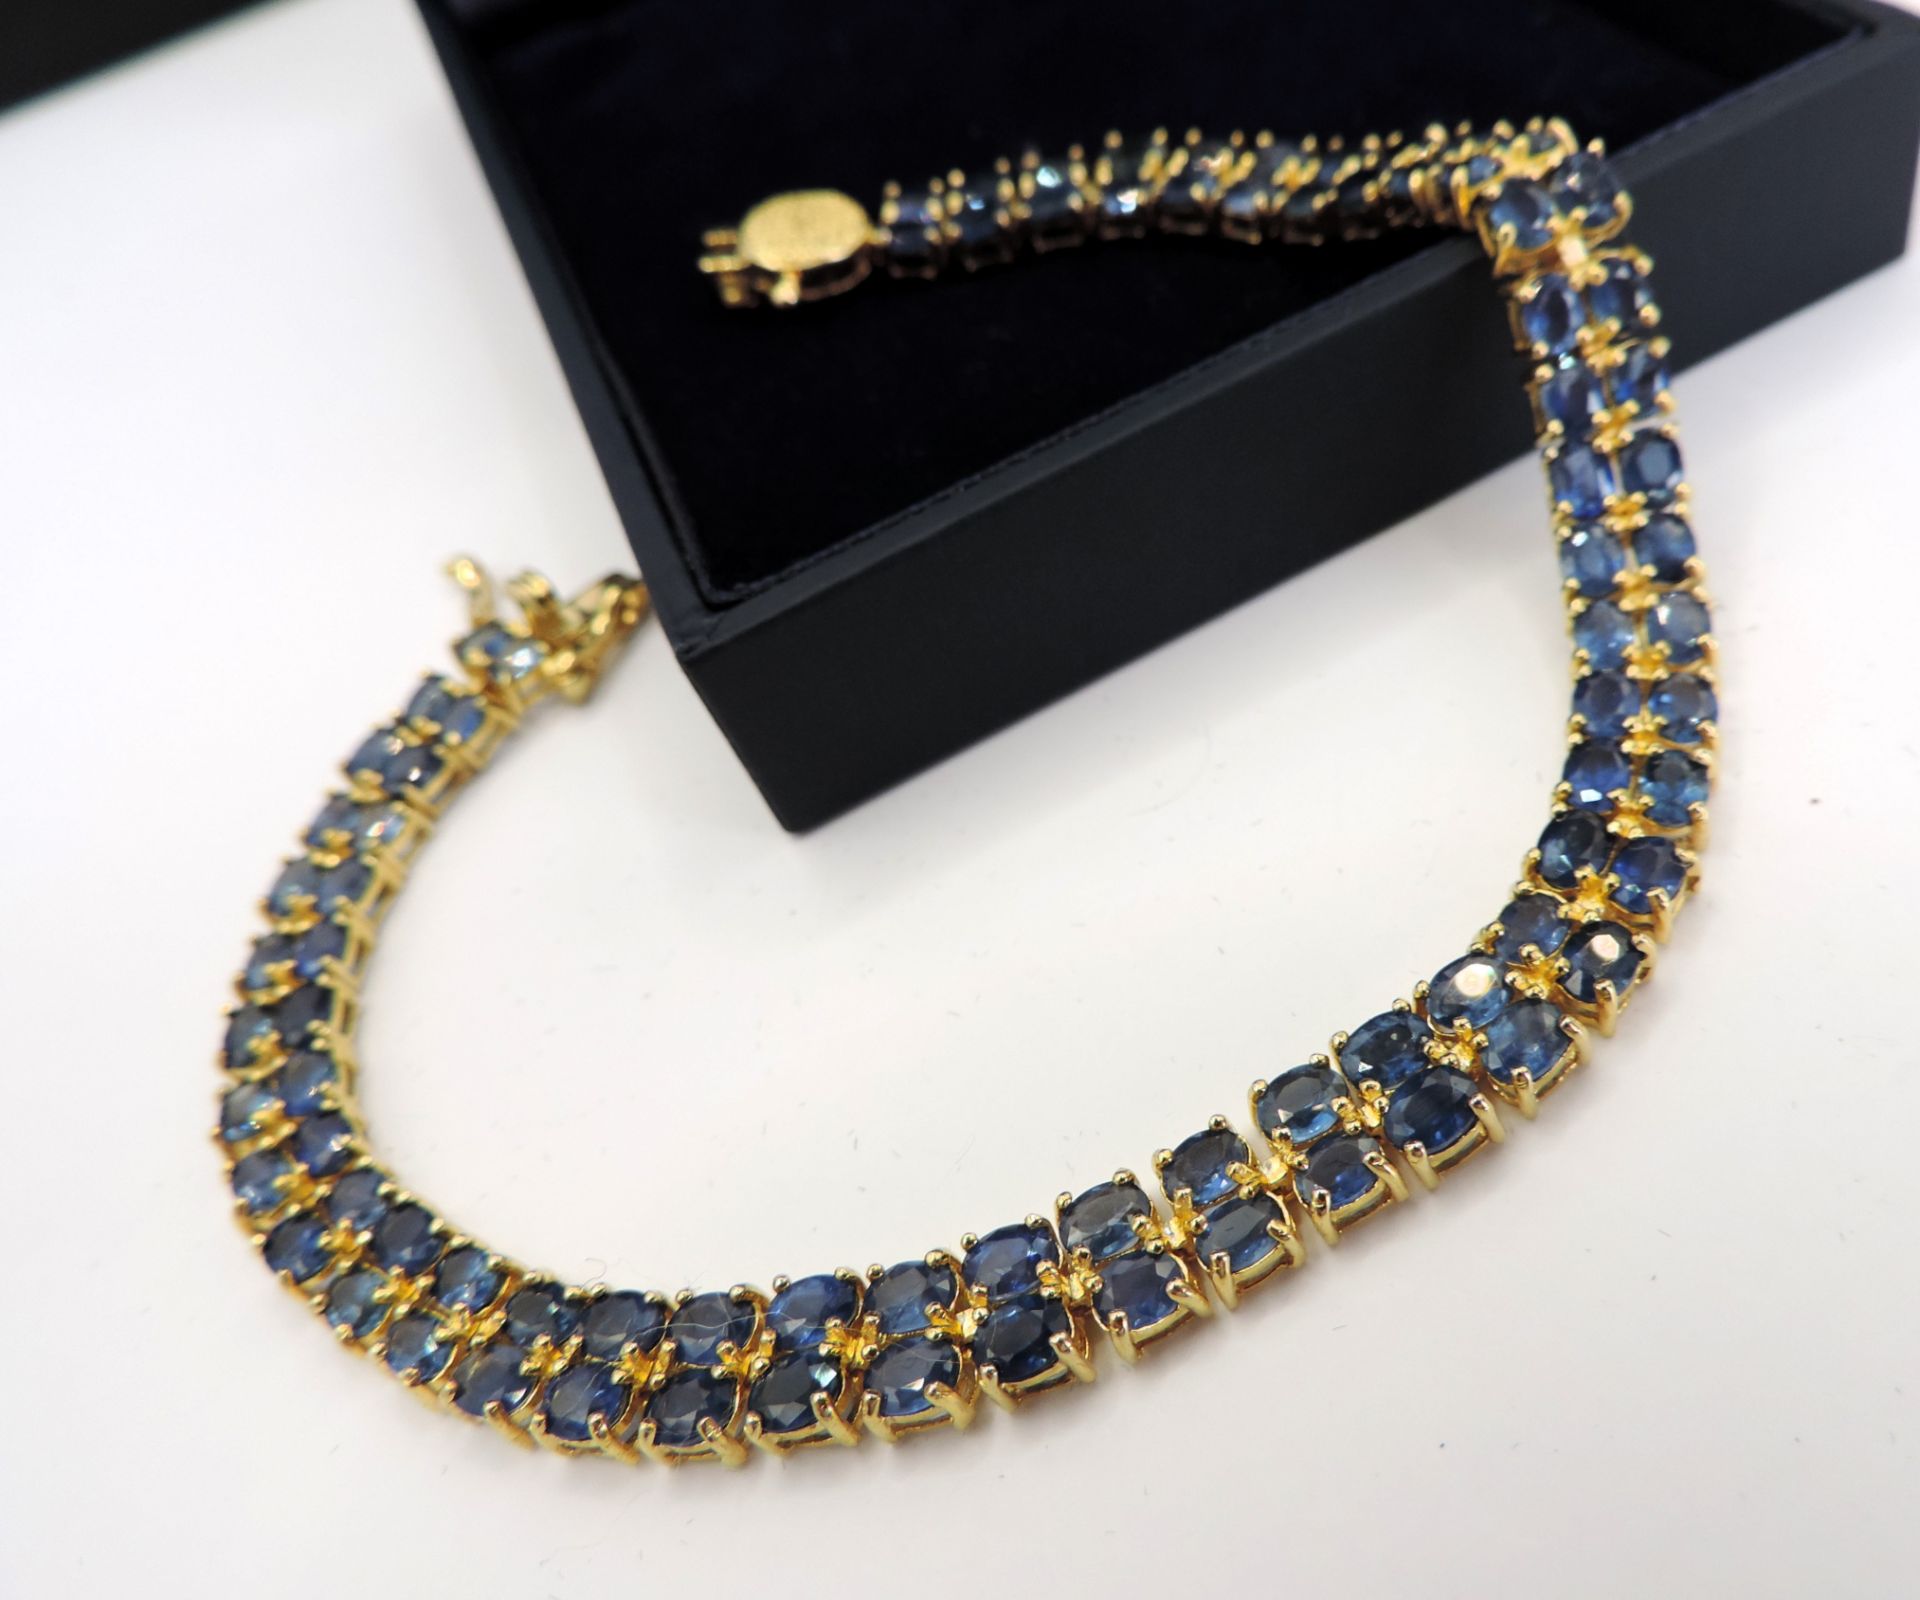 14K Gold on Sterling Silver 21.5CT Sapphire 2 Row Line Bracelet New with Gift Box - Image 2 of 5